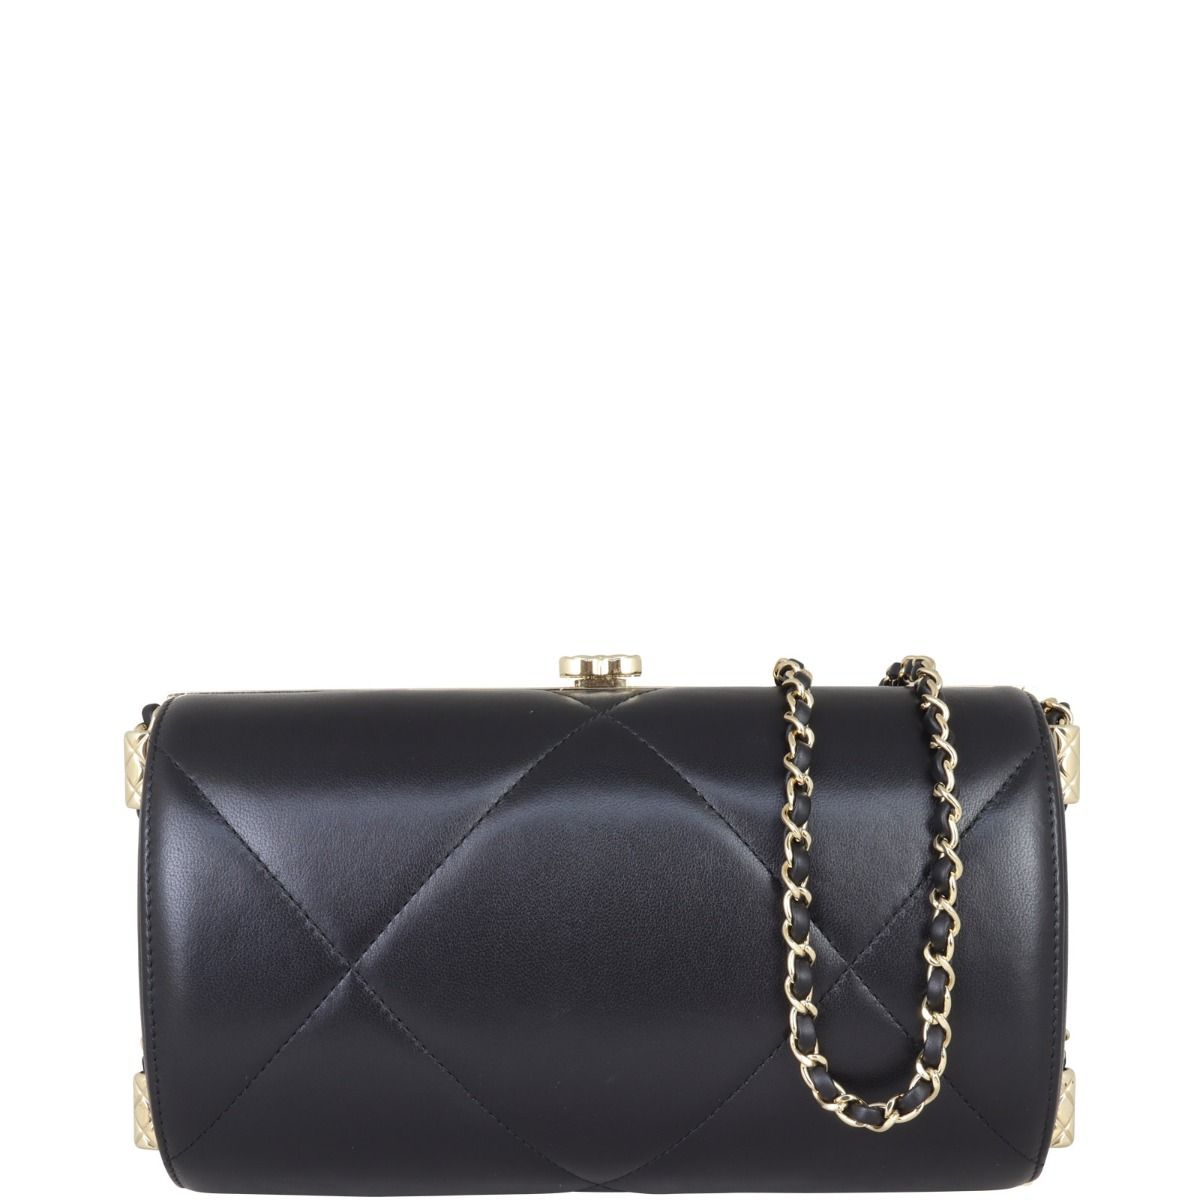 CHANEL Round Clutch With Chain in Iridescent Black Caviar  Dearluxe